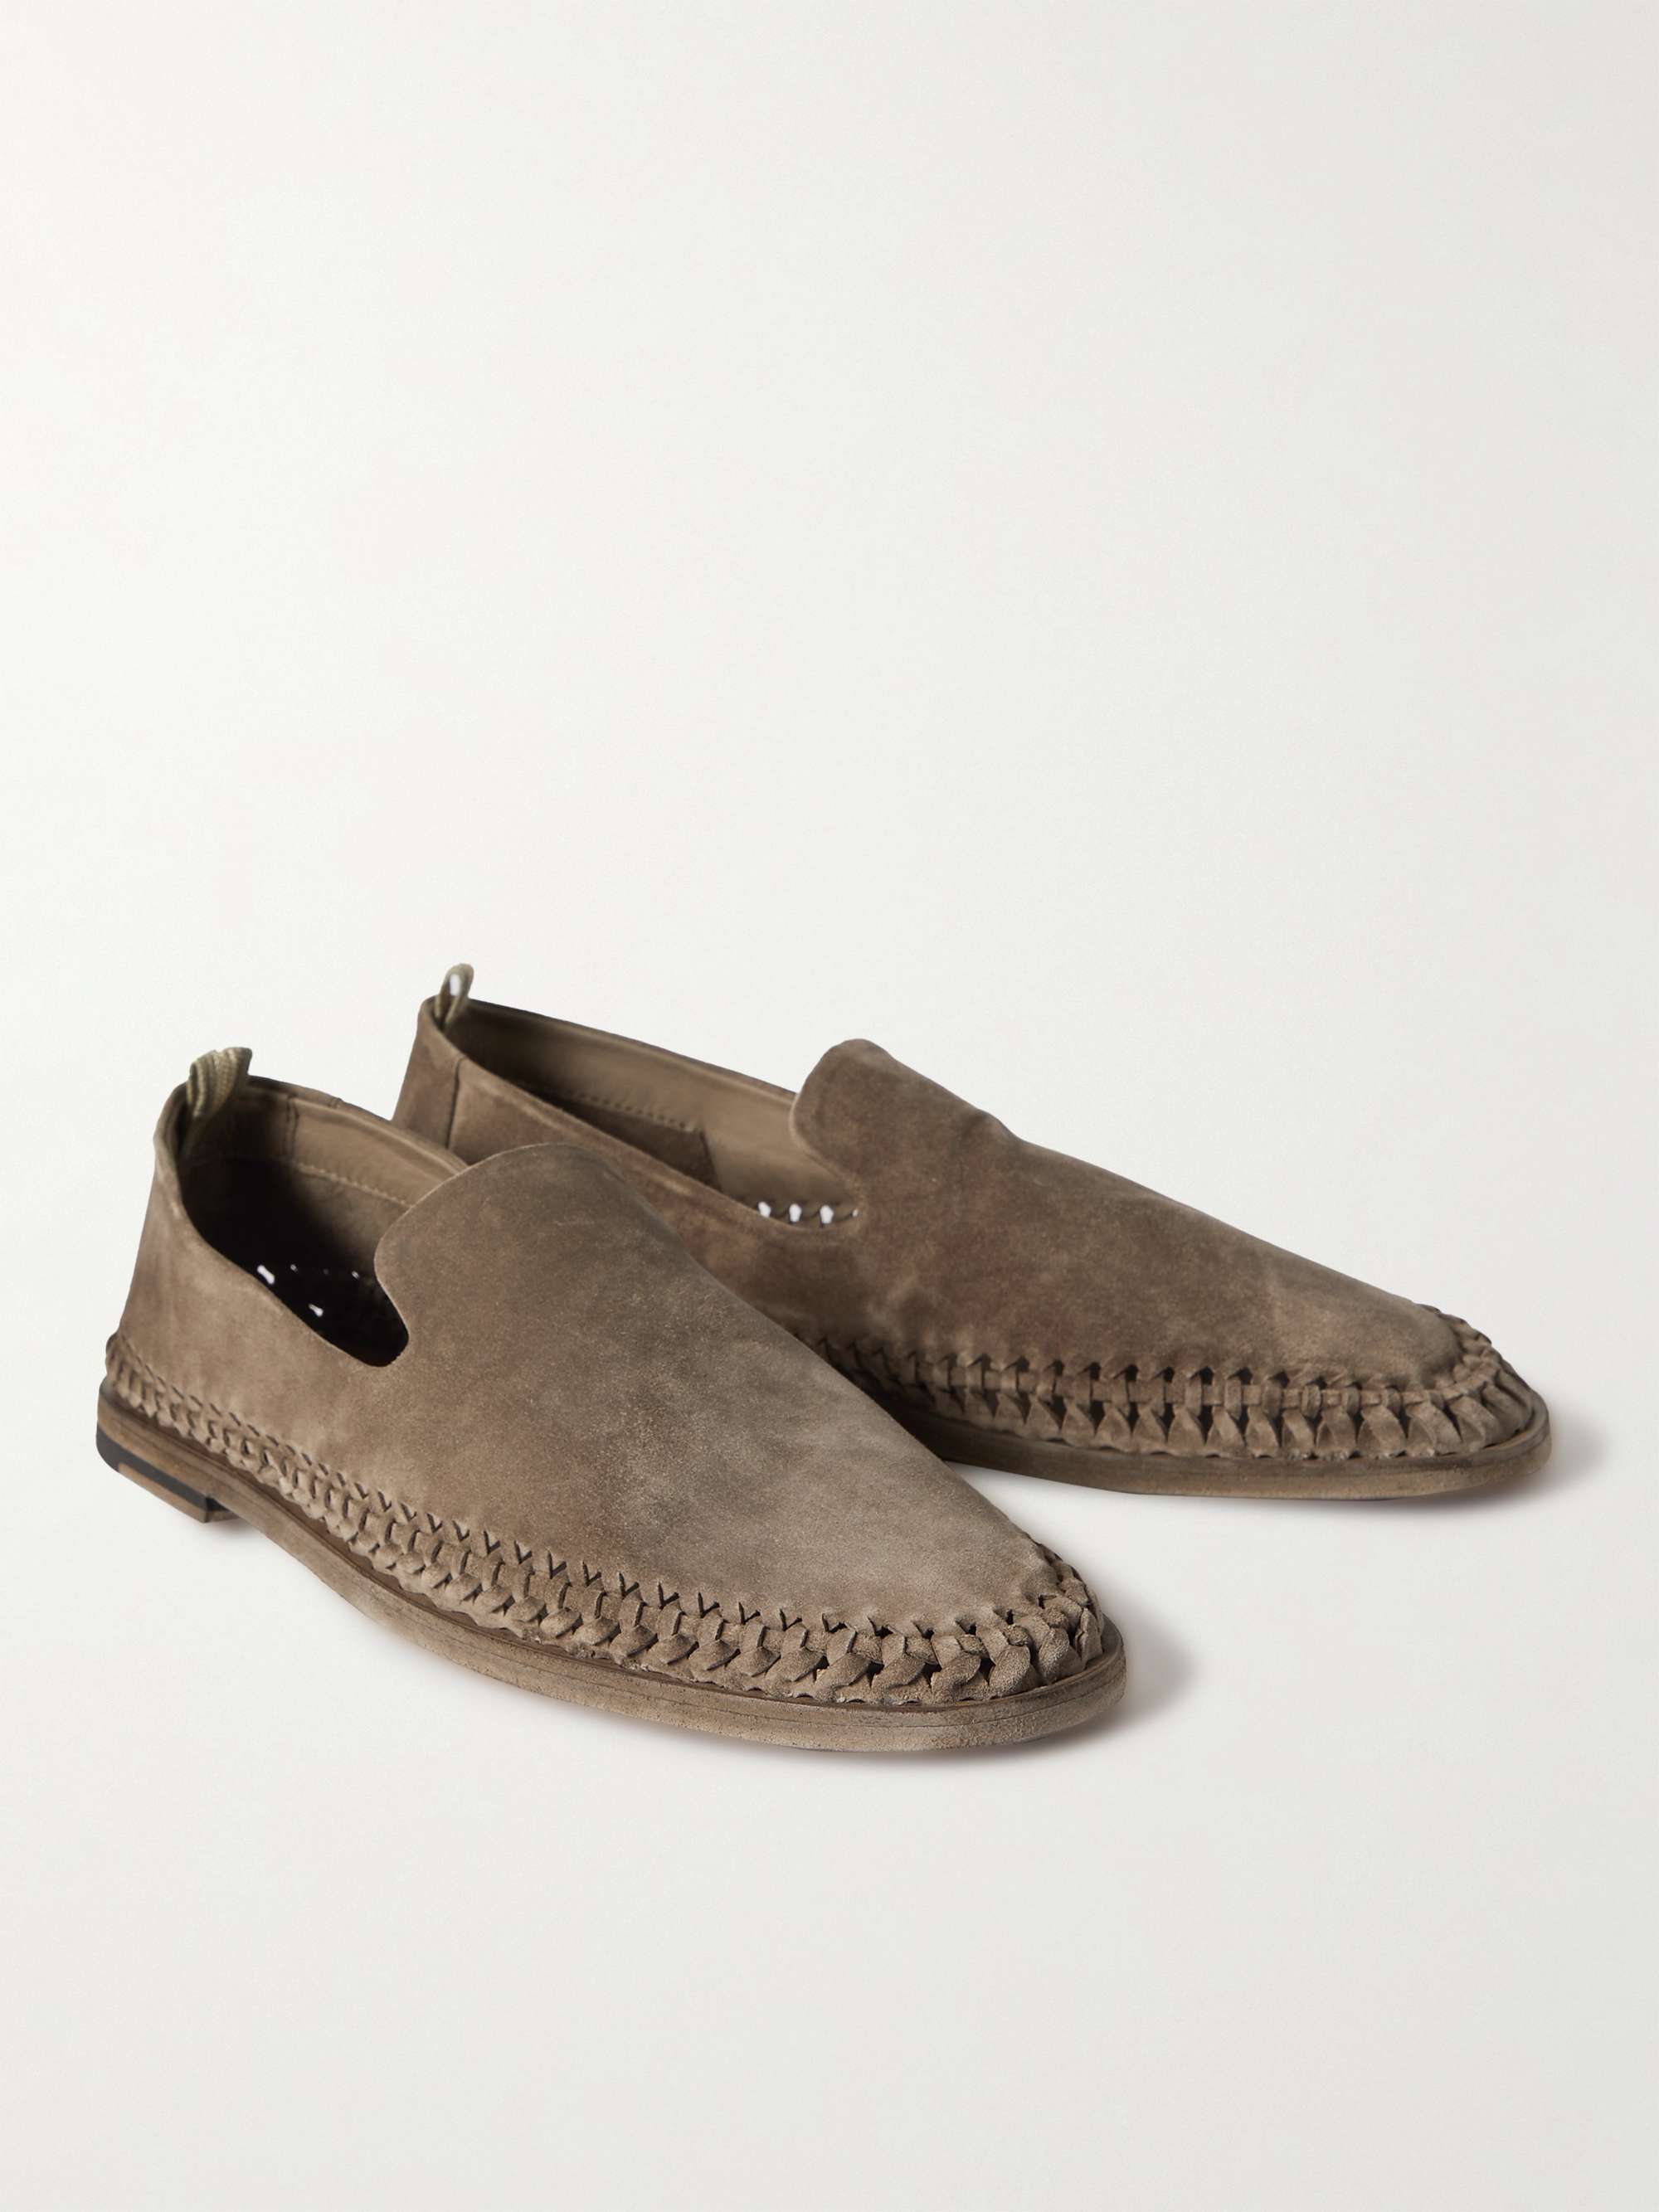 OFFICINE CREATIVE Miles Braided Suede Loafers | MR PORTER